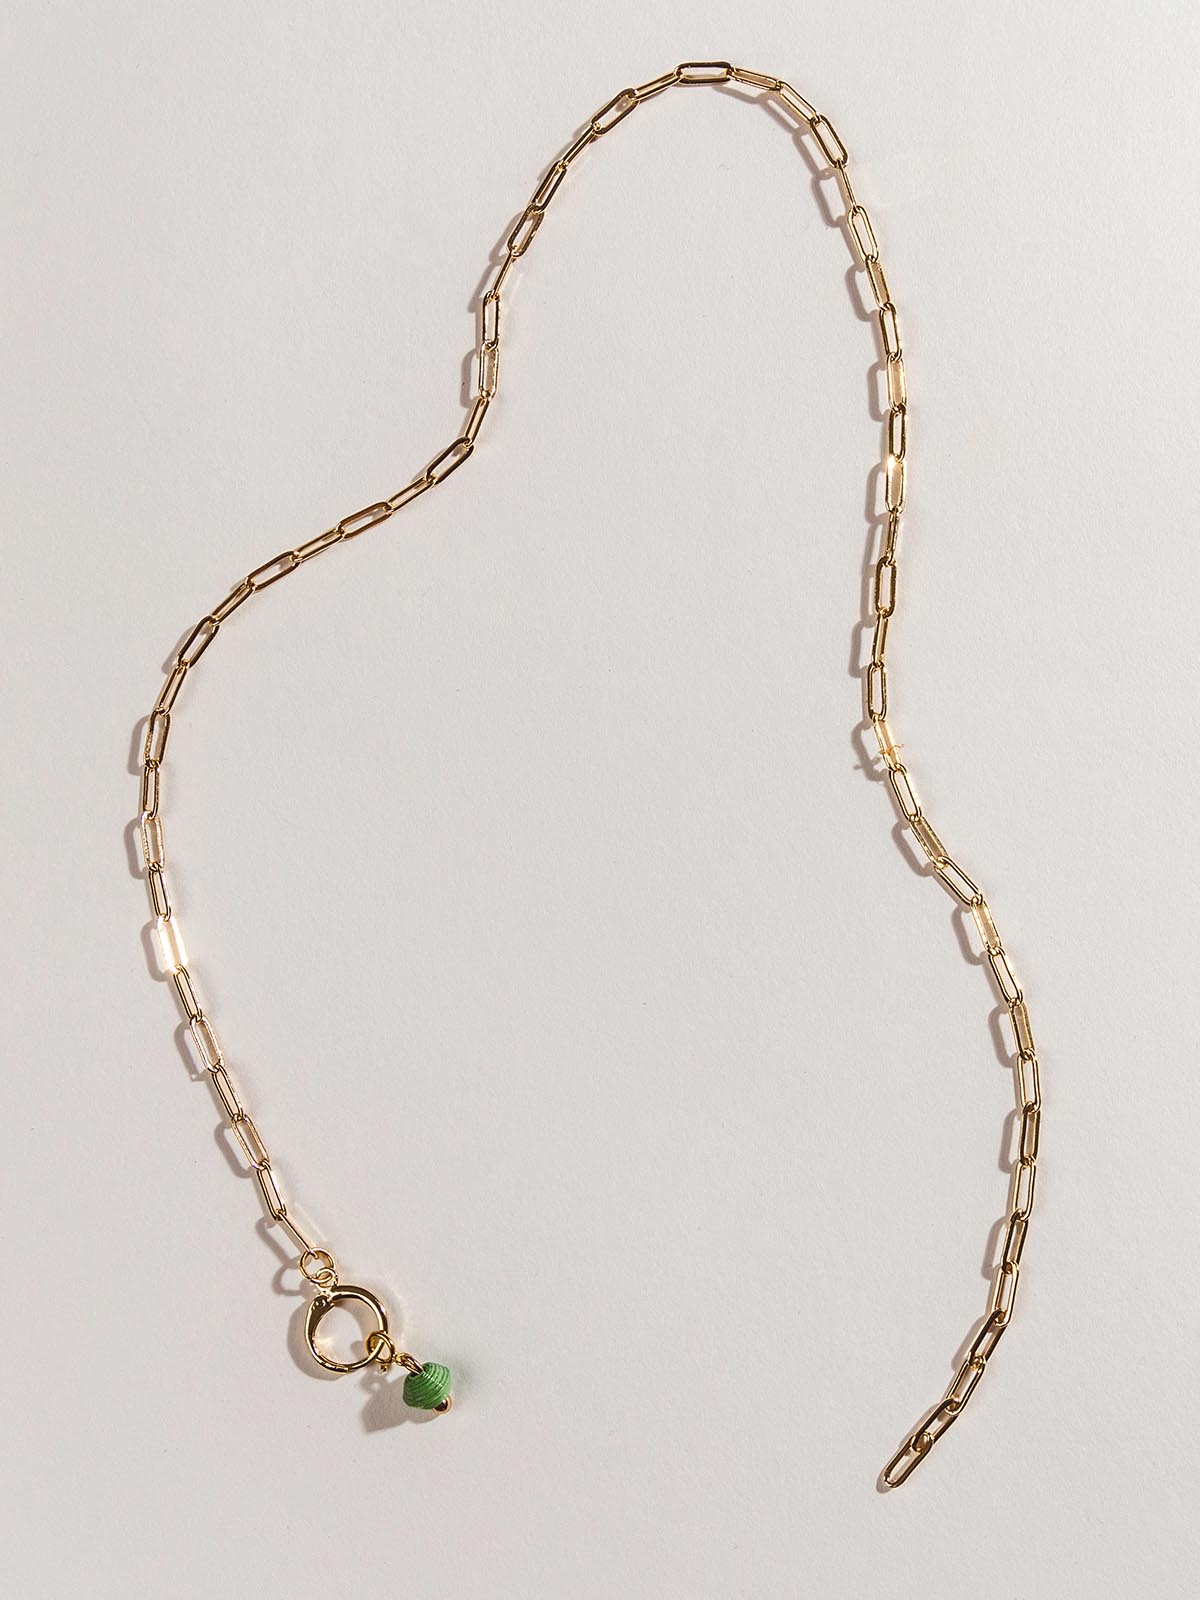 Golden chain charm necklace with one green birthstone bead on the clasp. Necklace is laid on a white surface.